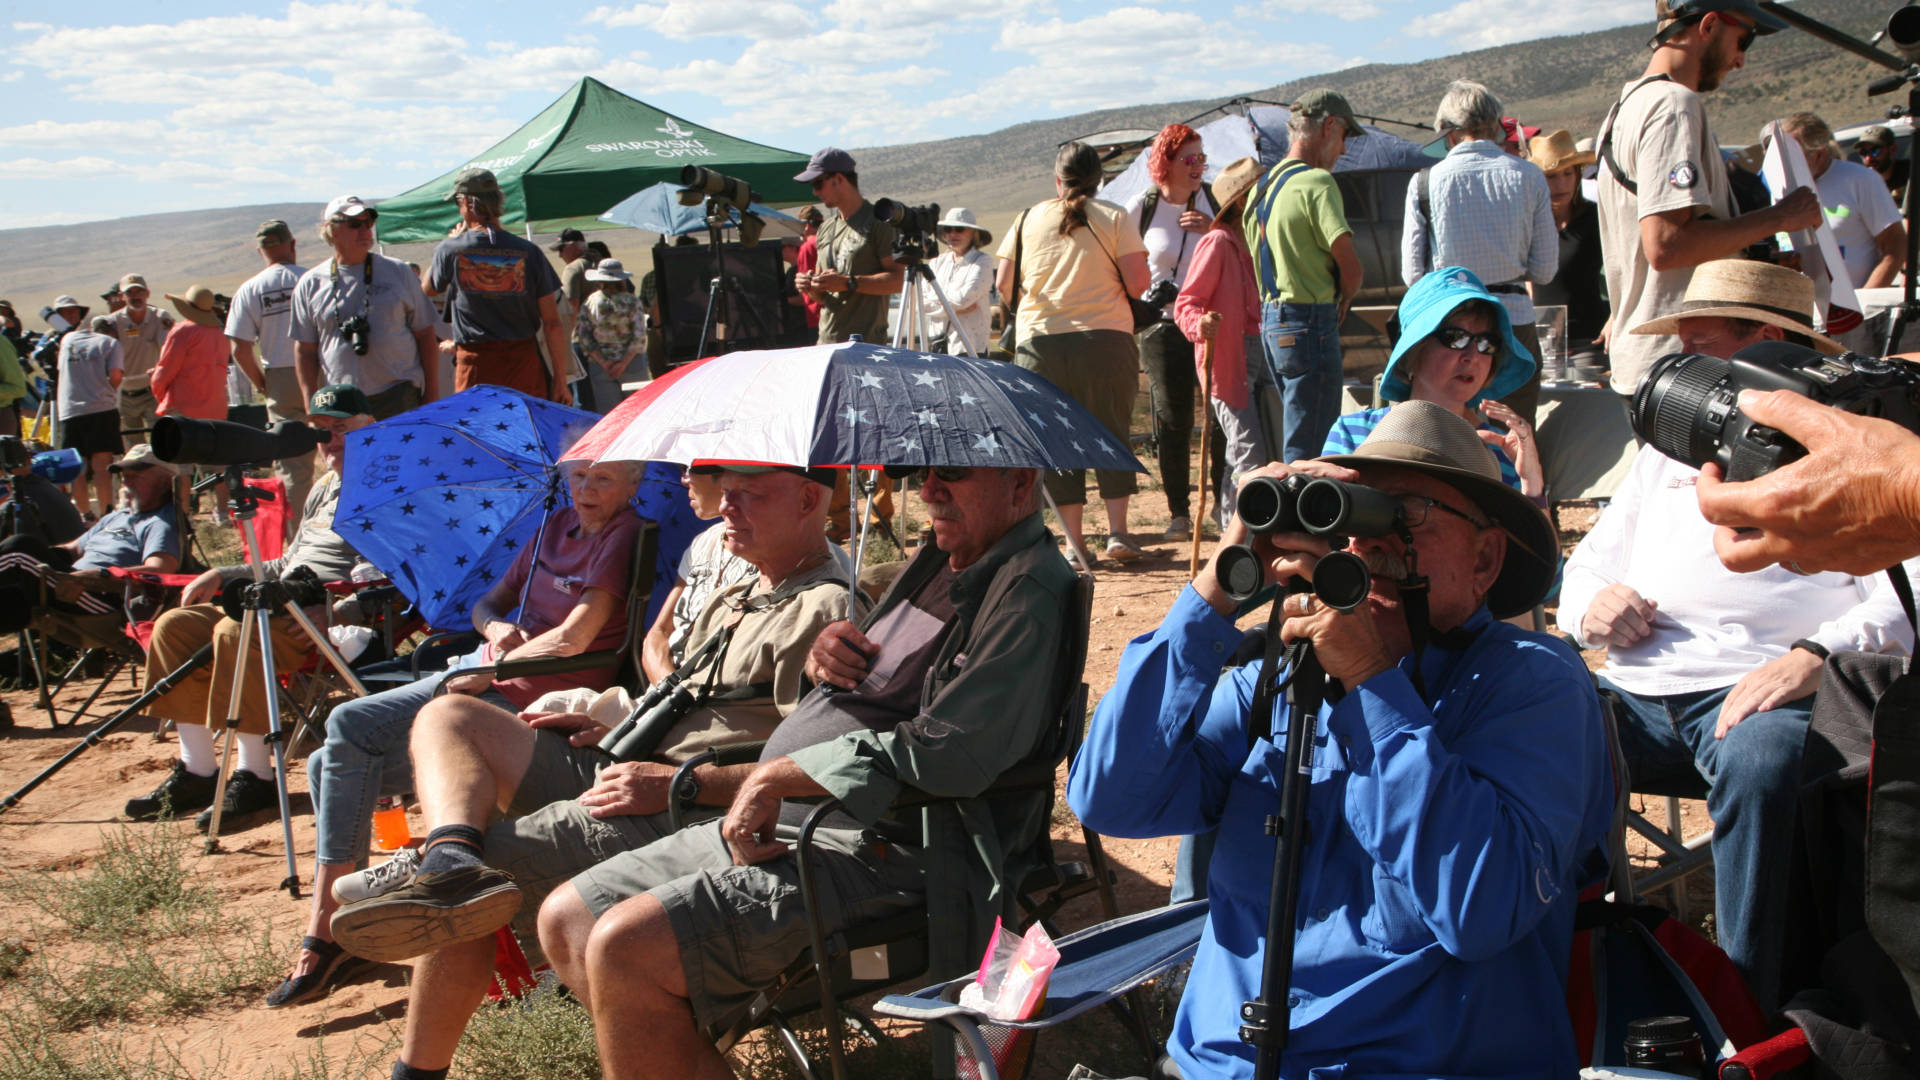 This year, more than 750 people came to see the release of the condors at Vermilion Cliffs National Monument in Arizona.